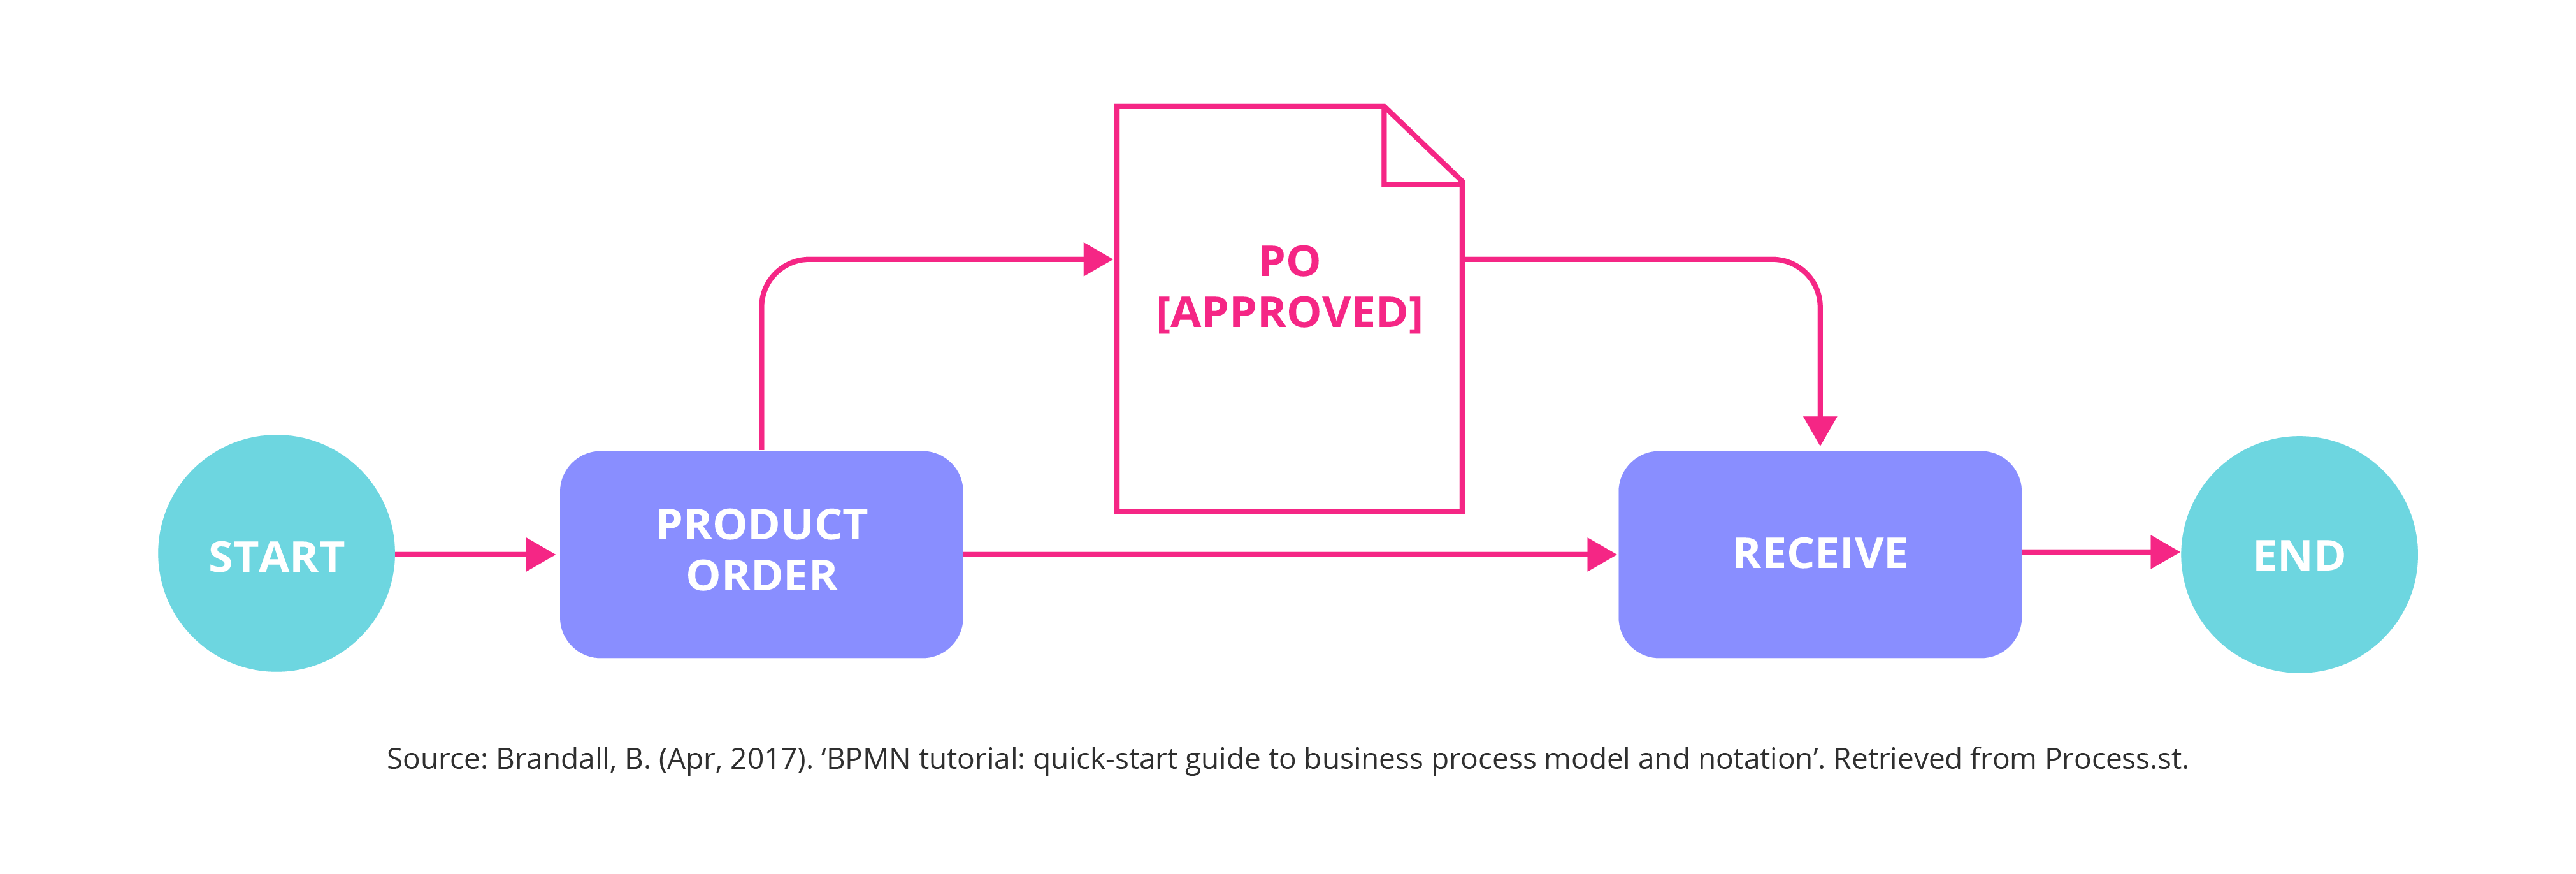 BPMN Stands for Business Process Modelling Notation